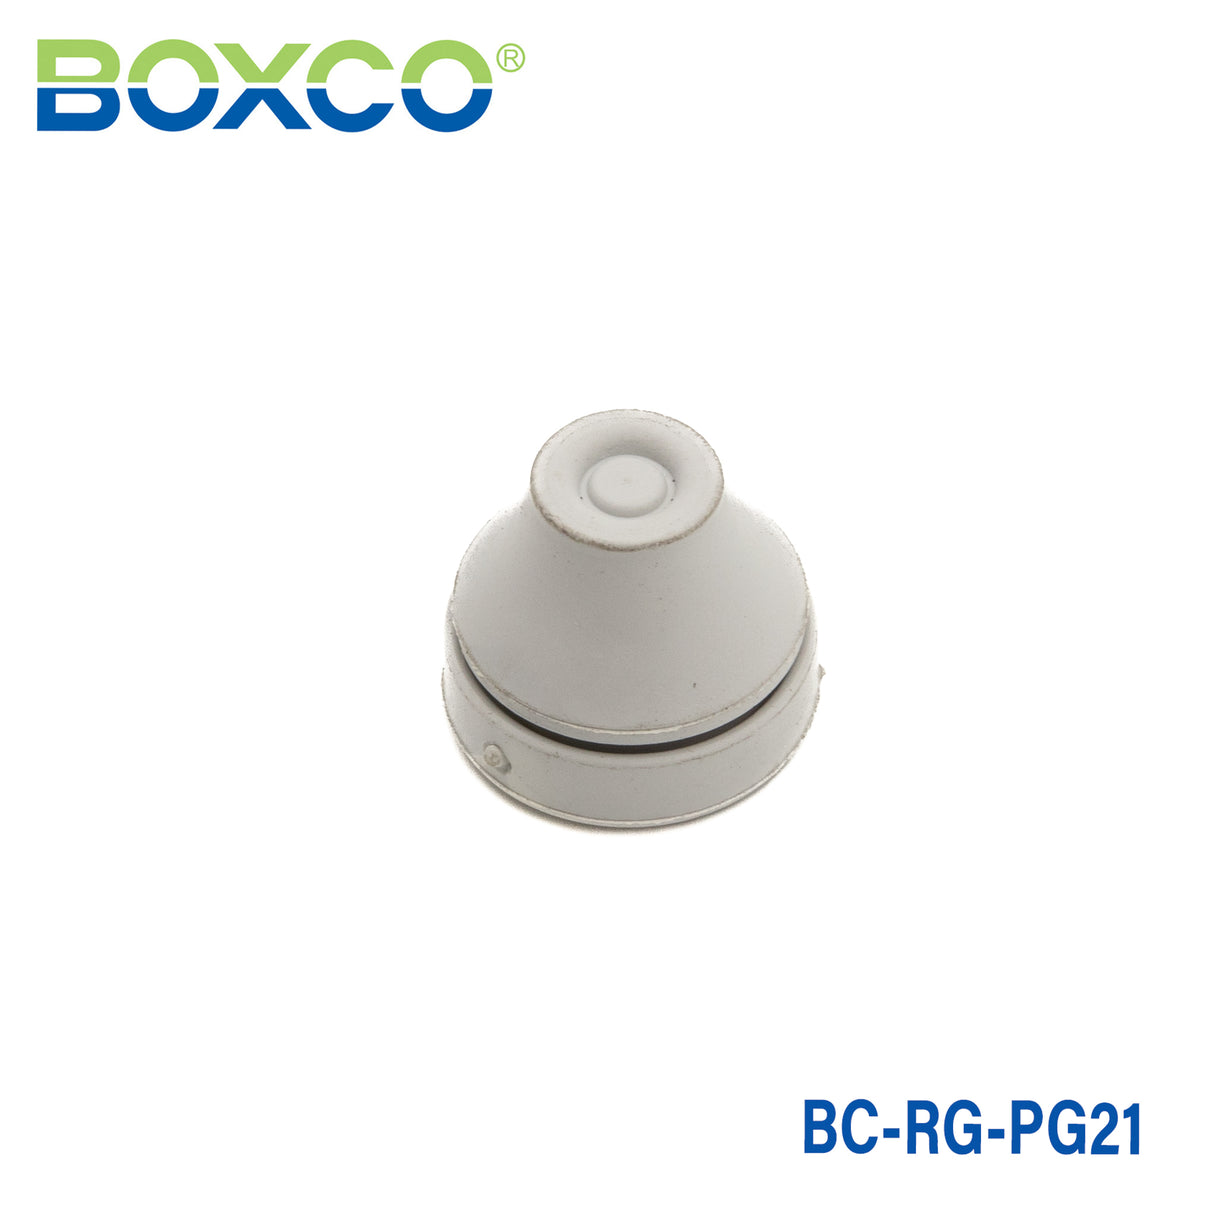 Boxco BC-RG-PG21 Rubber Cable Gland Grommet 29 mm Hole Ivory